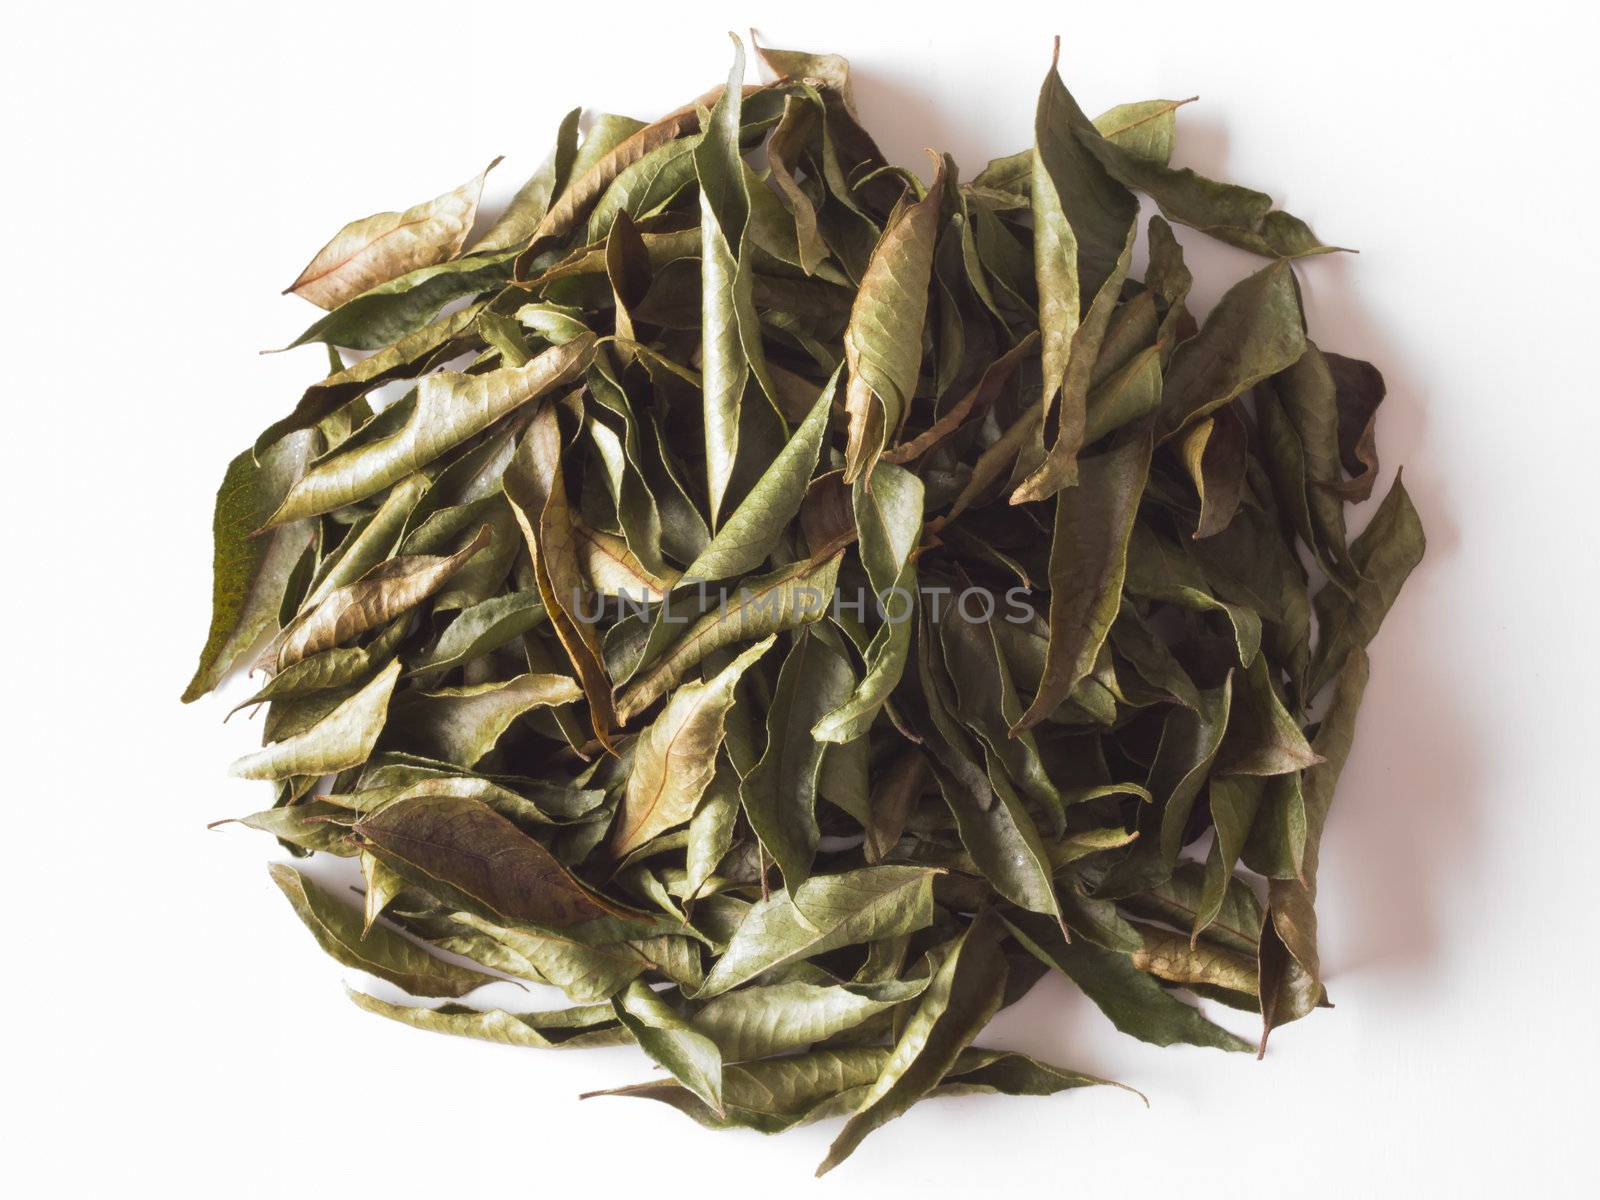 dried curry leaves by zkruger